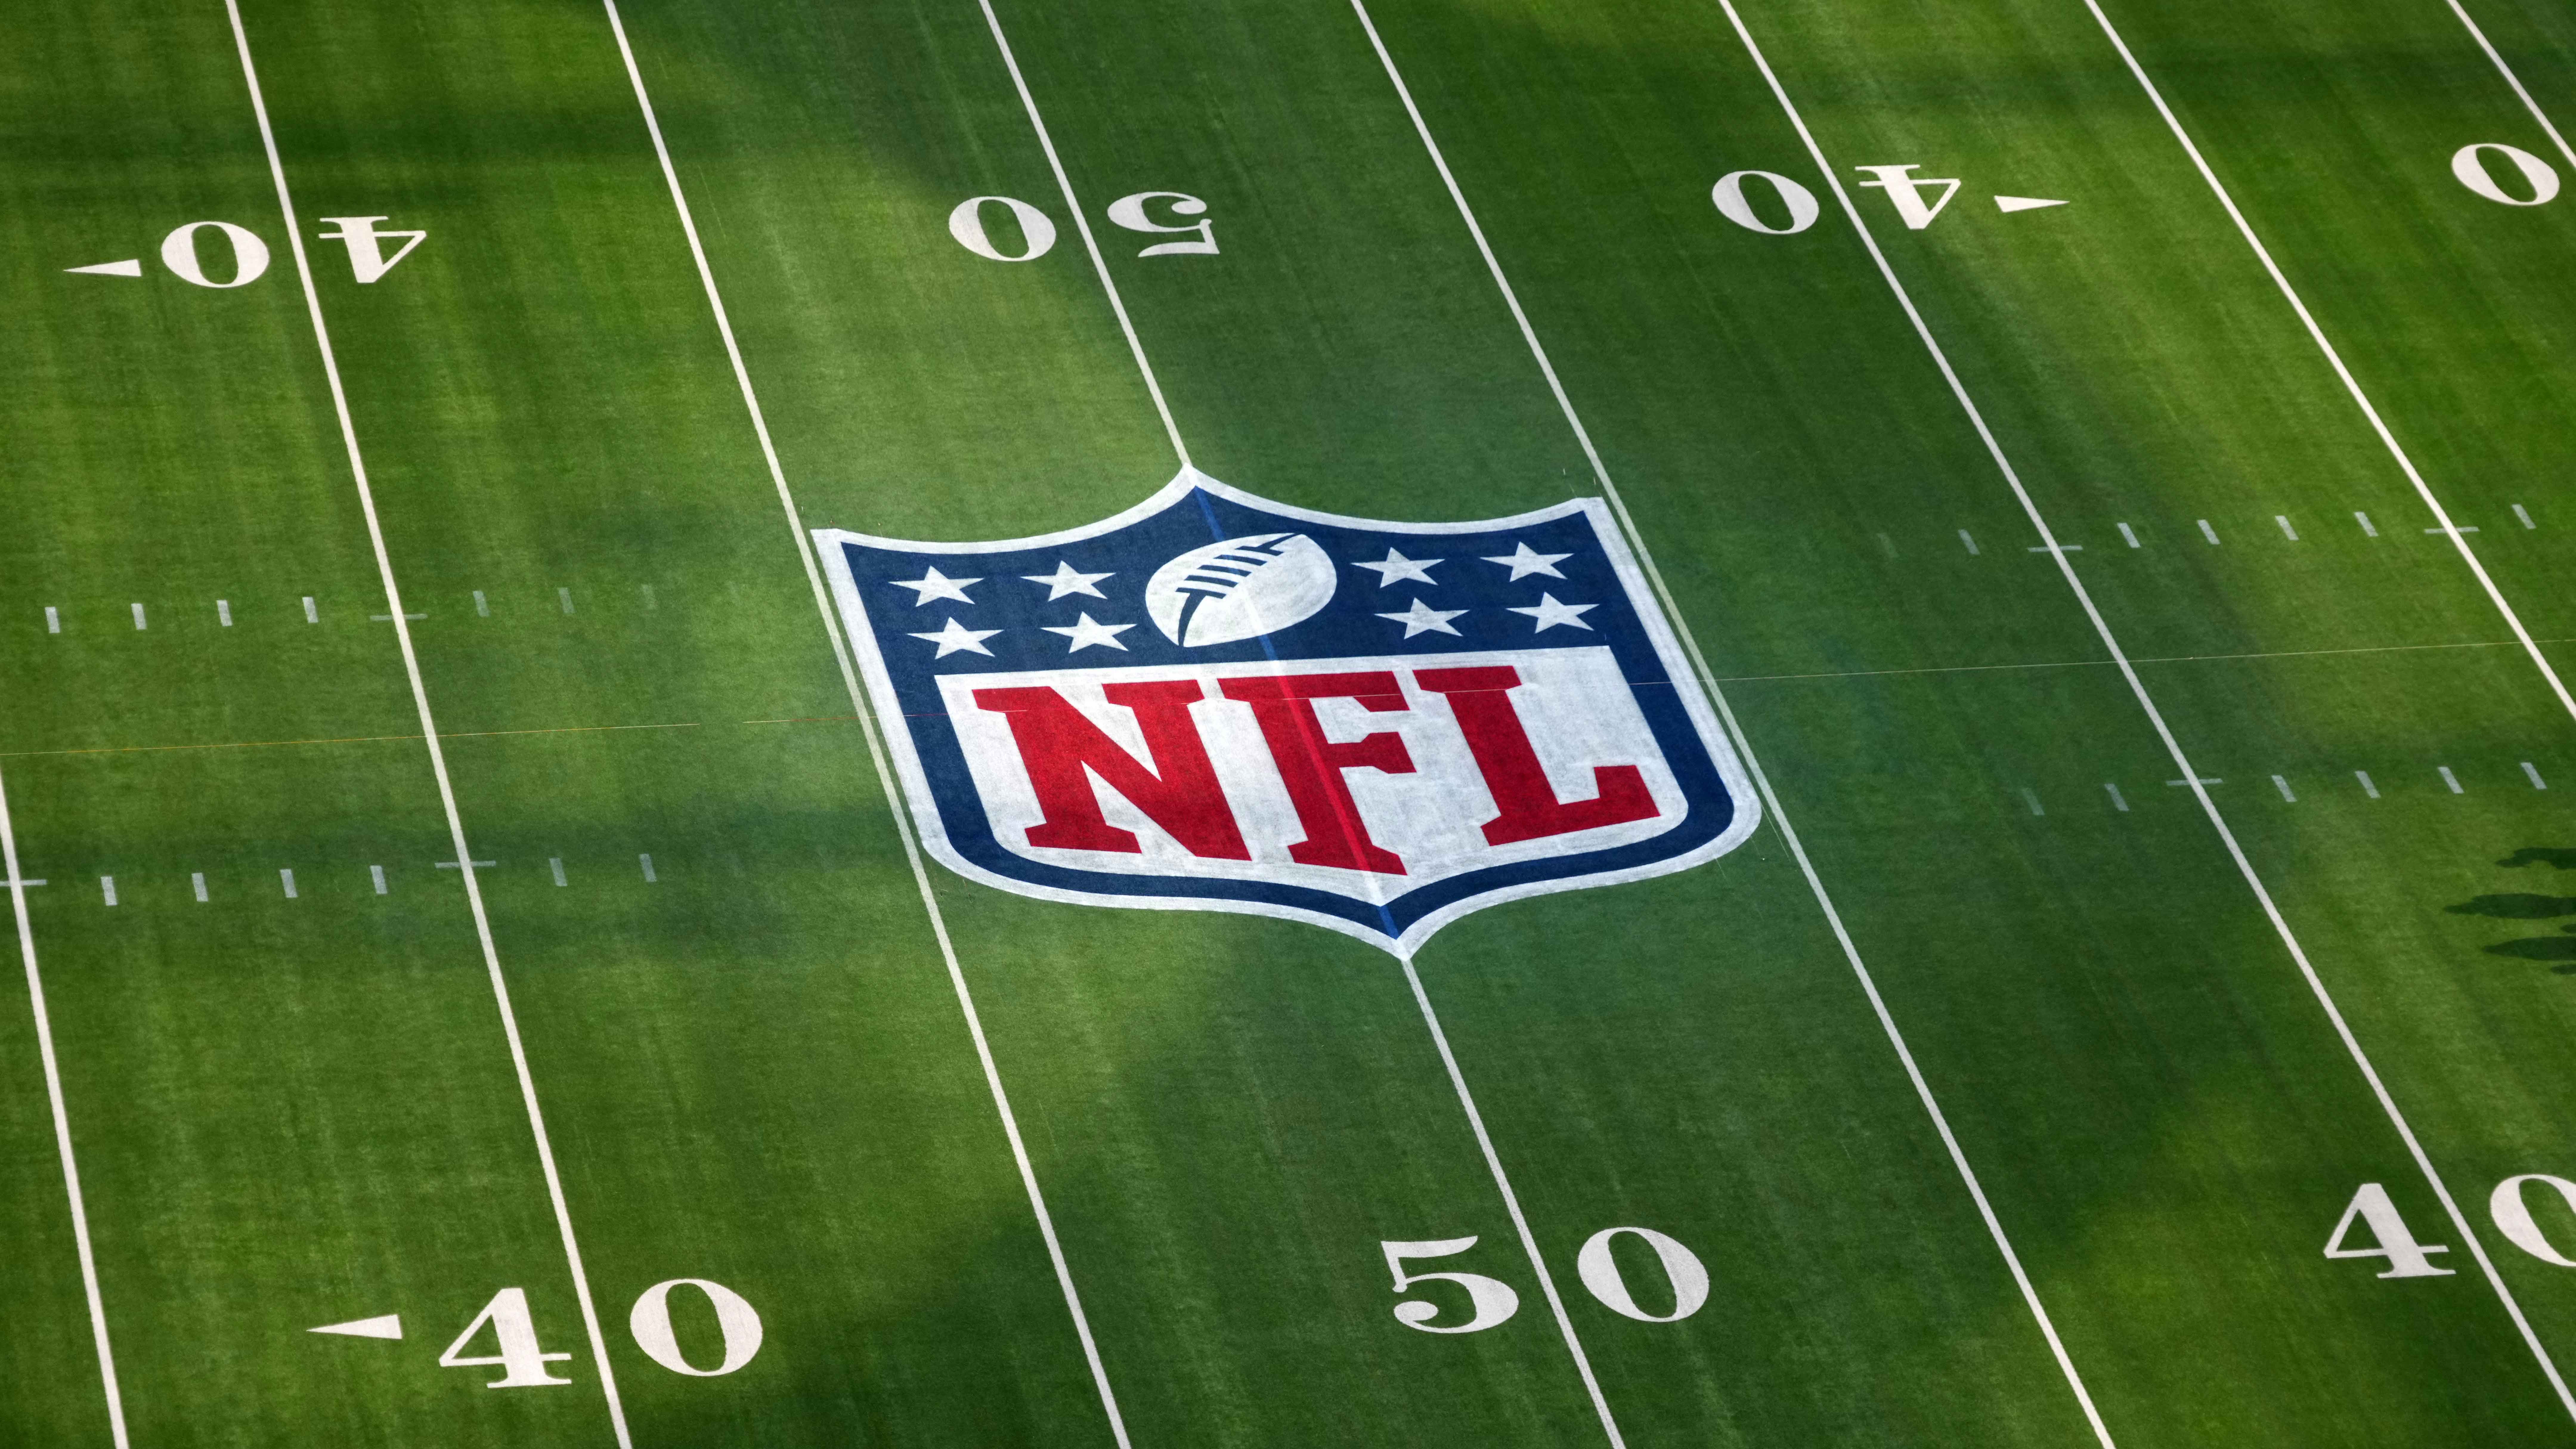 Lowest-scoring NFL games in history: List of fewest points ever